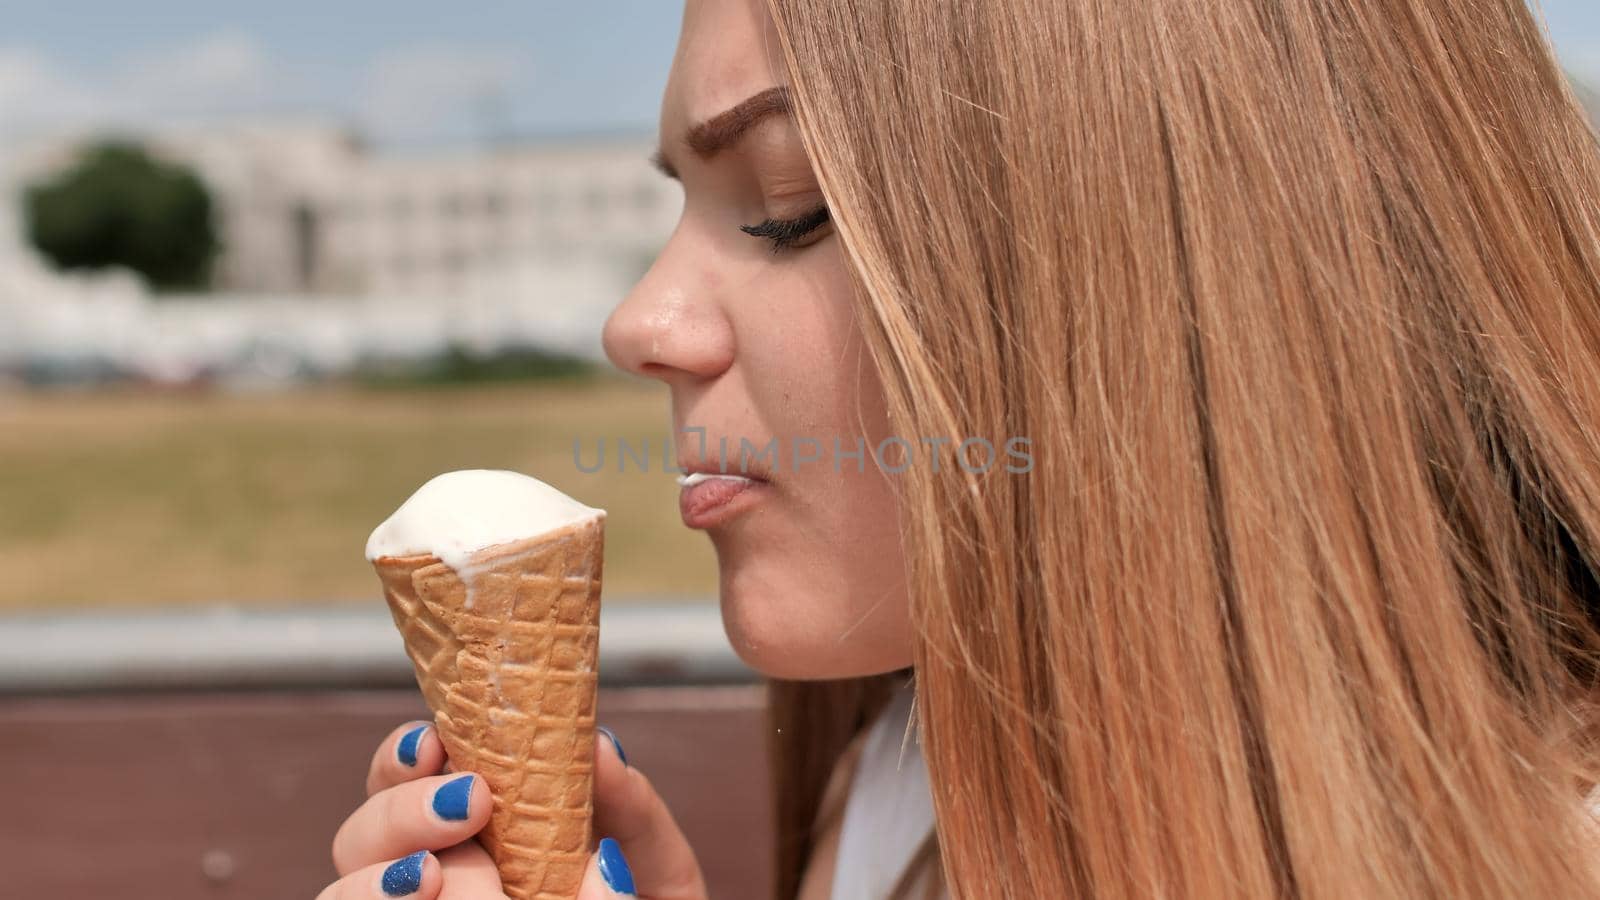 The girl eats an ice cream cone on the street of the city. by DovidPro